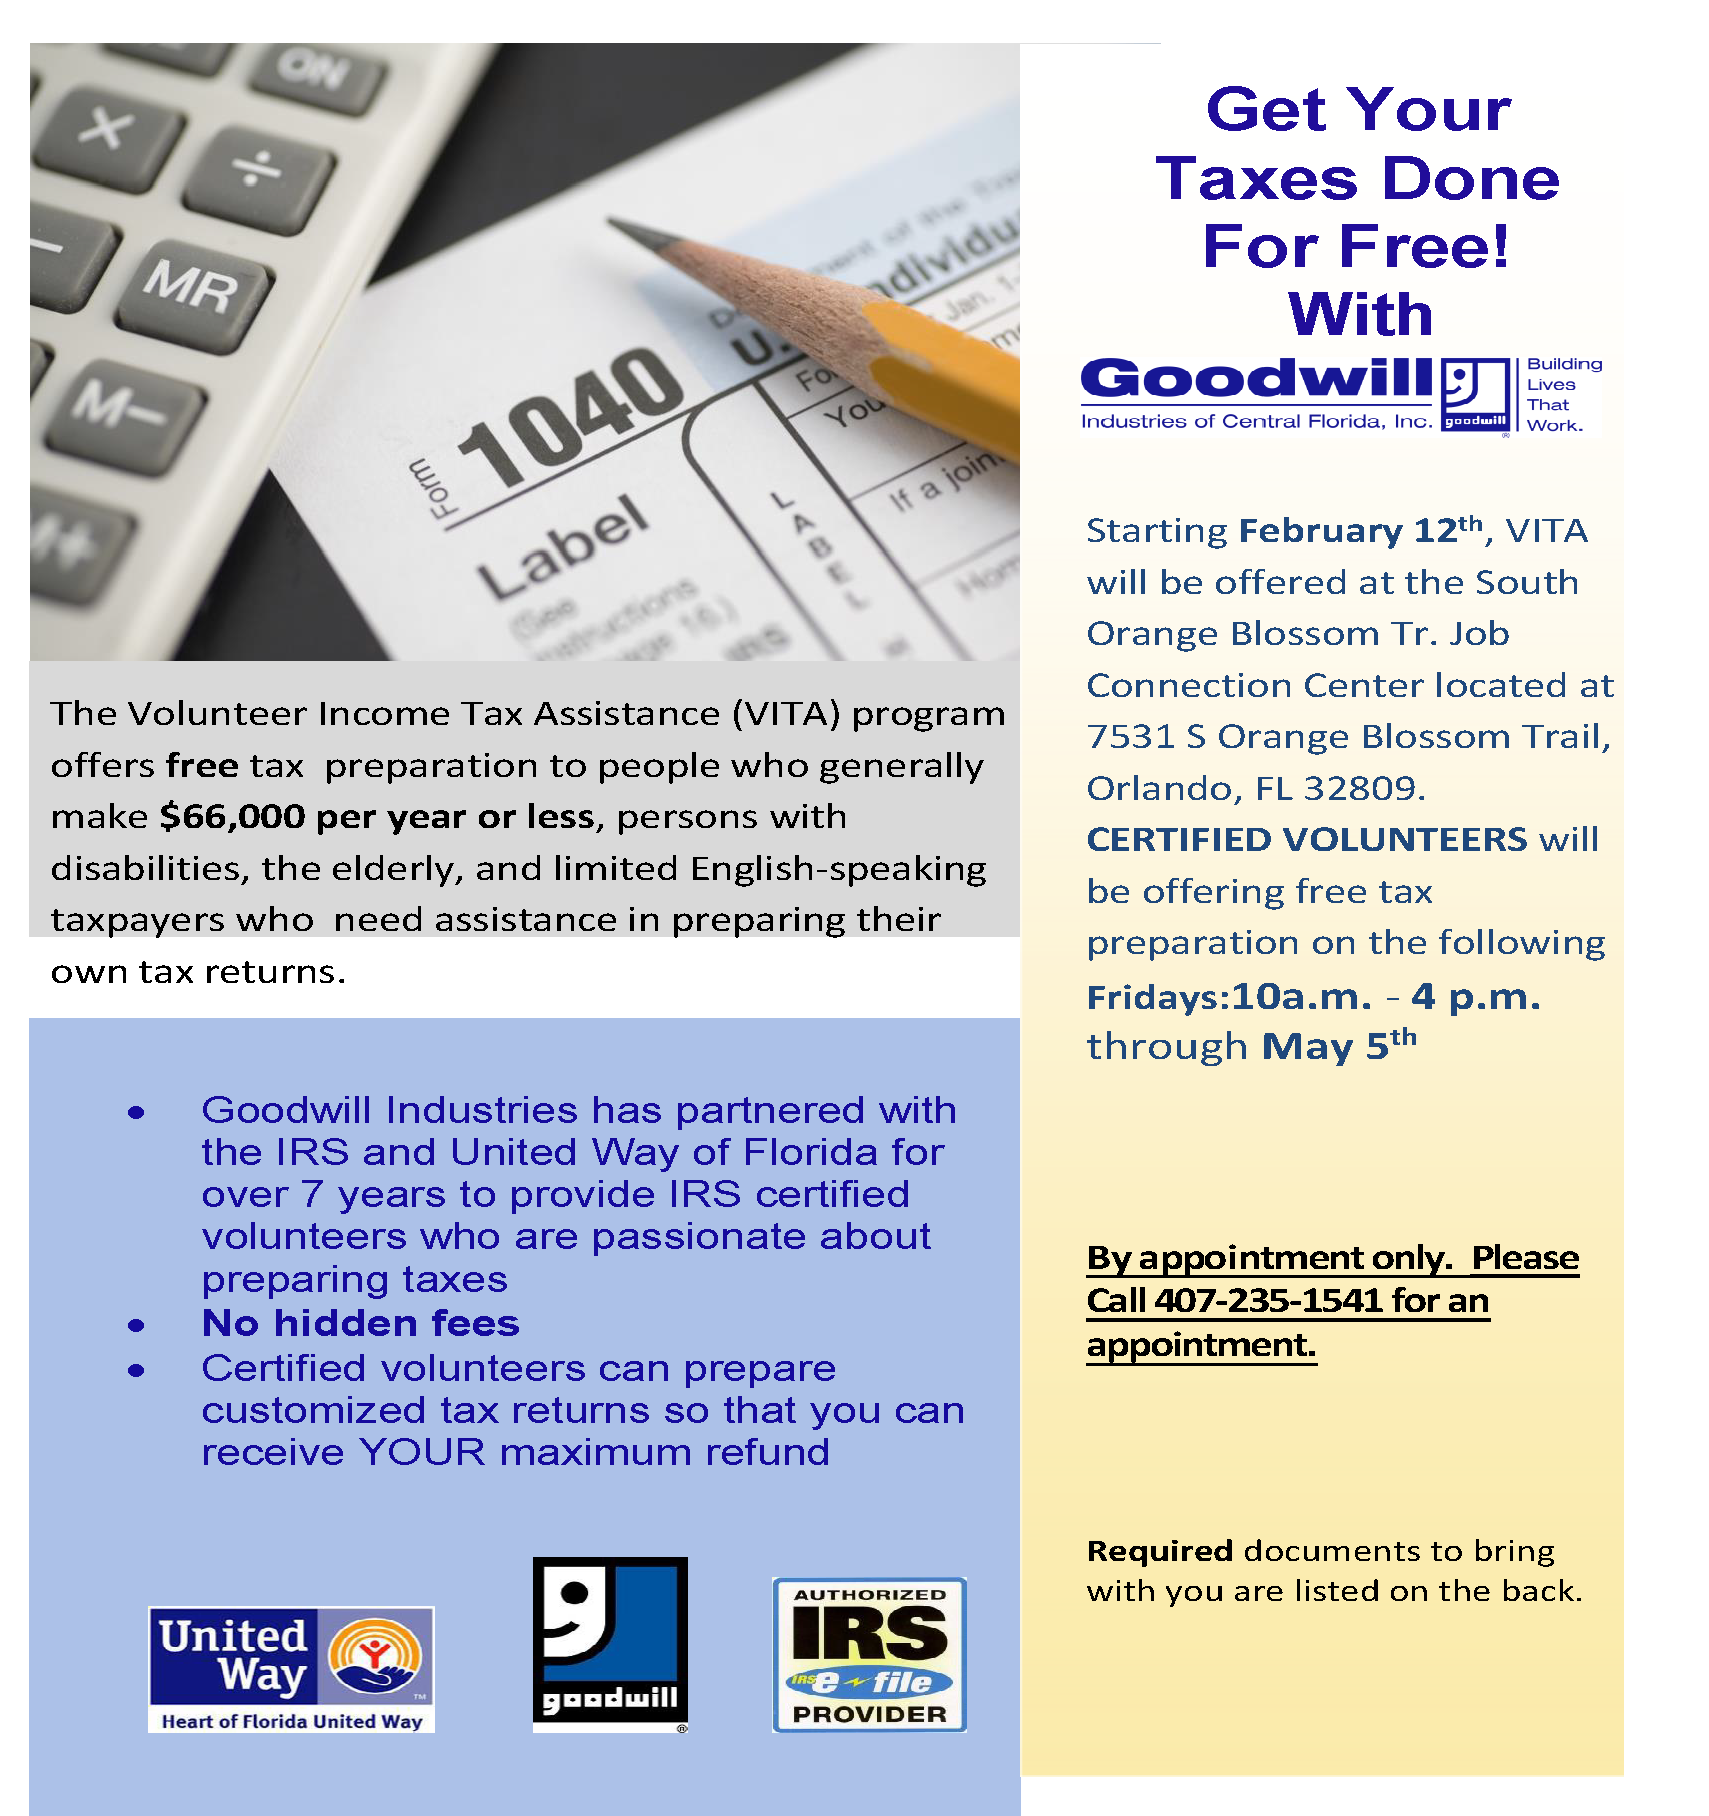 Get Your Taxes Done For Free flyer 2021_Page_1